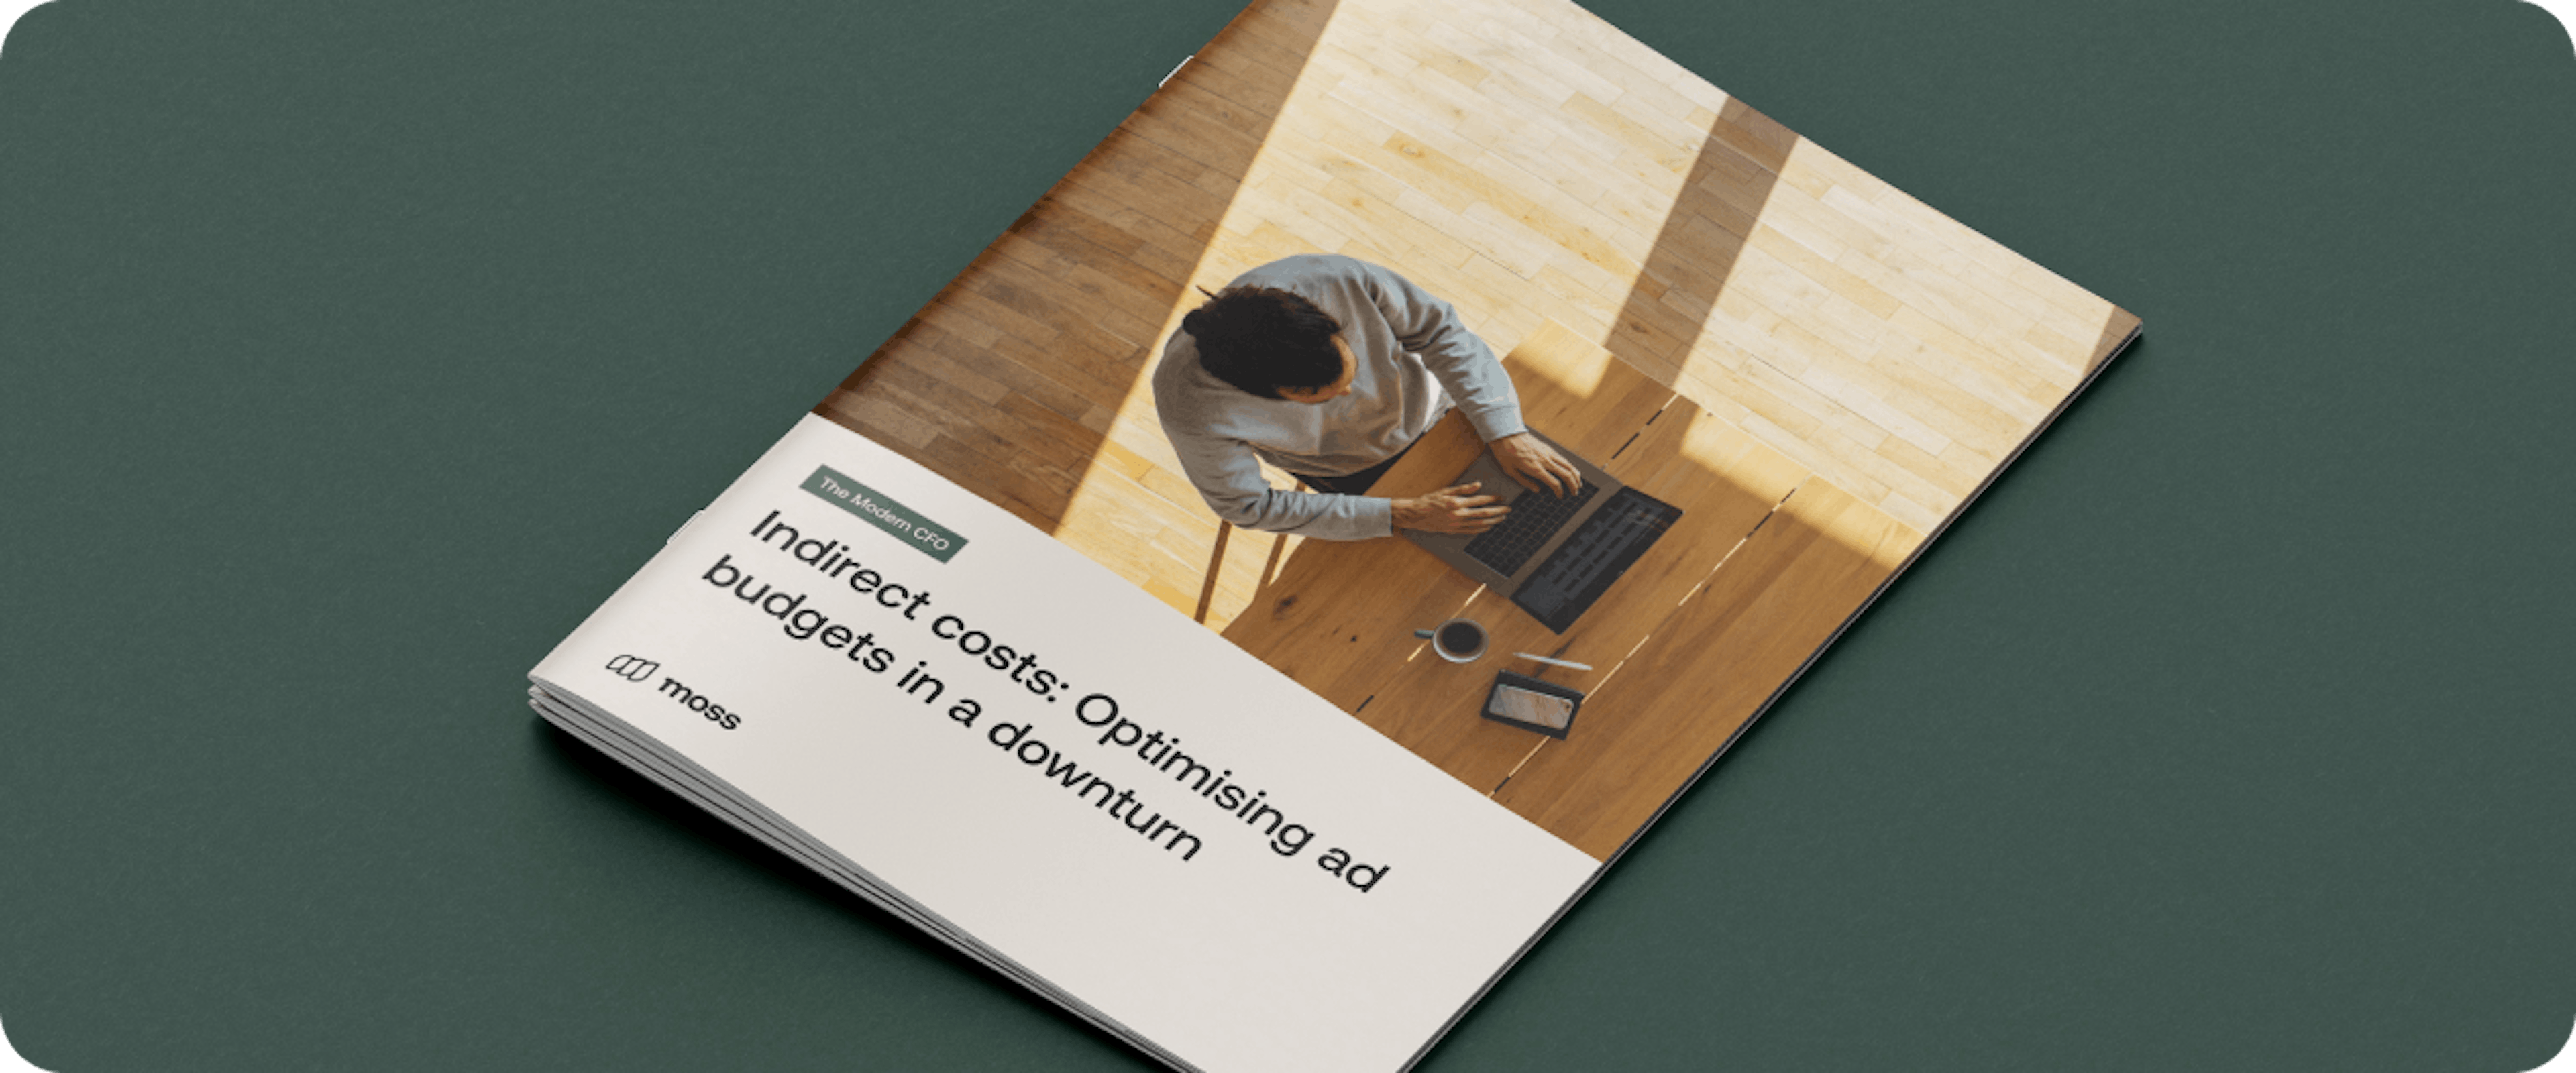 Indirect costs: Optimising ad budgets in a downturn White Paper